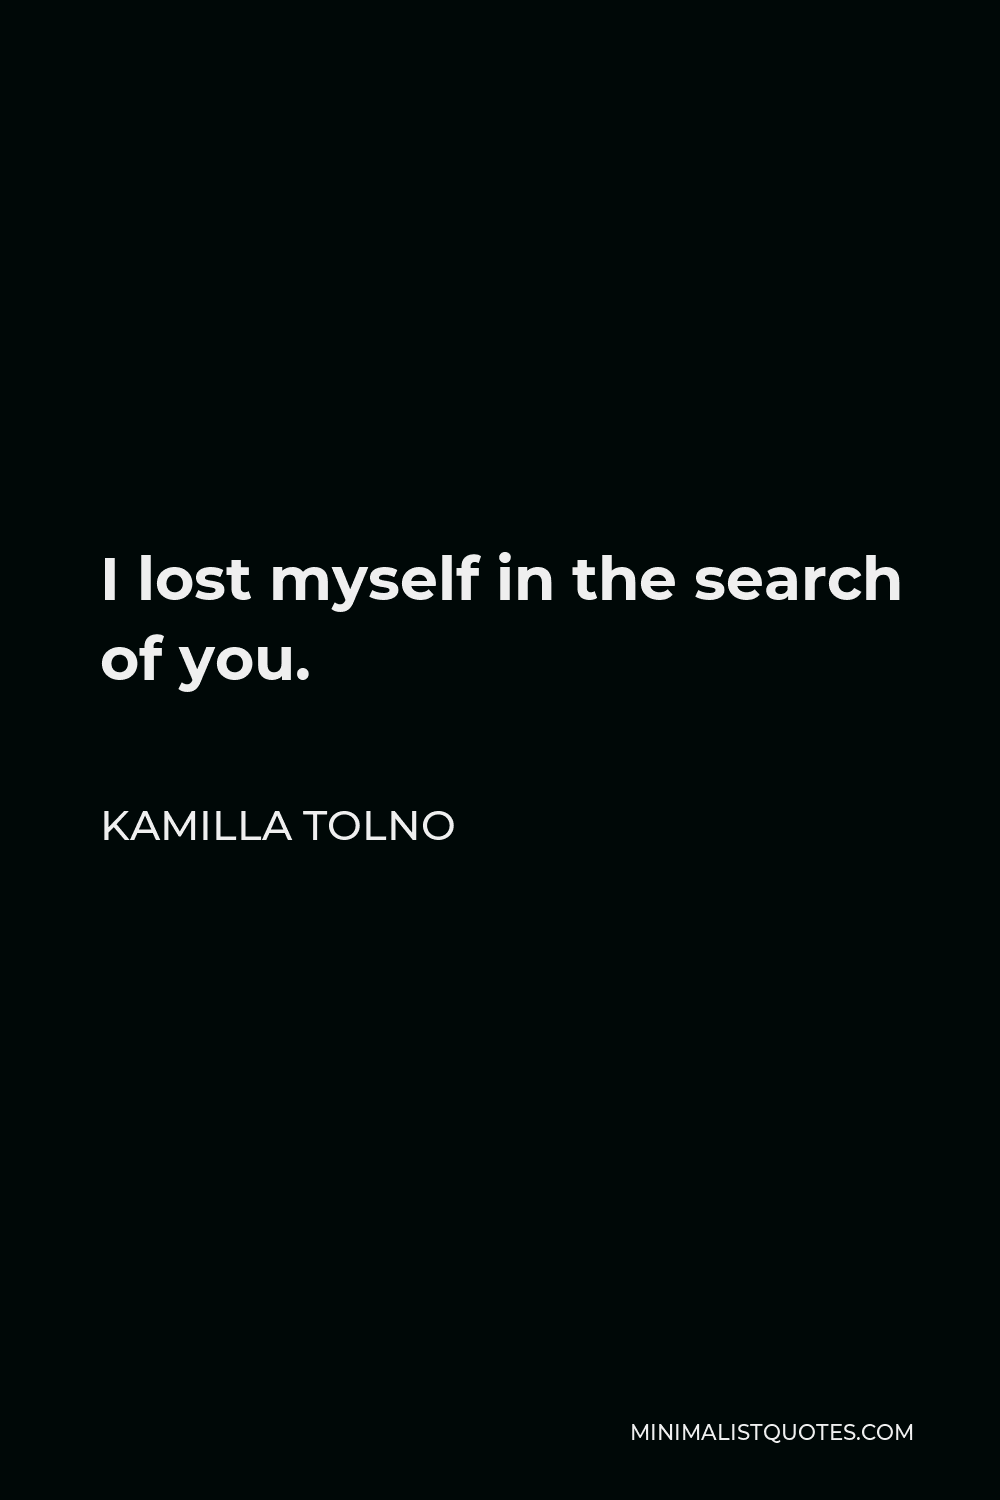 Kamilla Tolno Quote - I lost myself in the search of you.